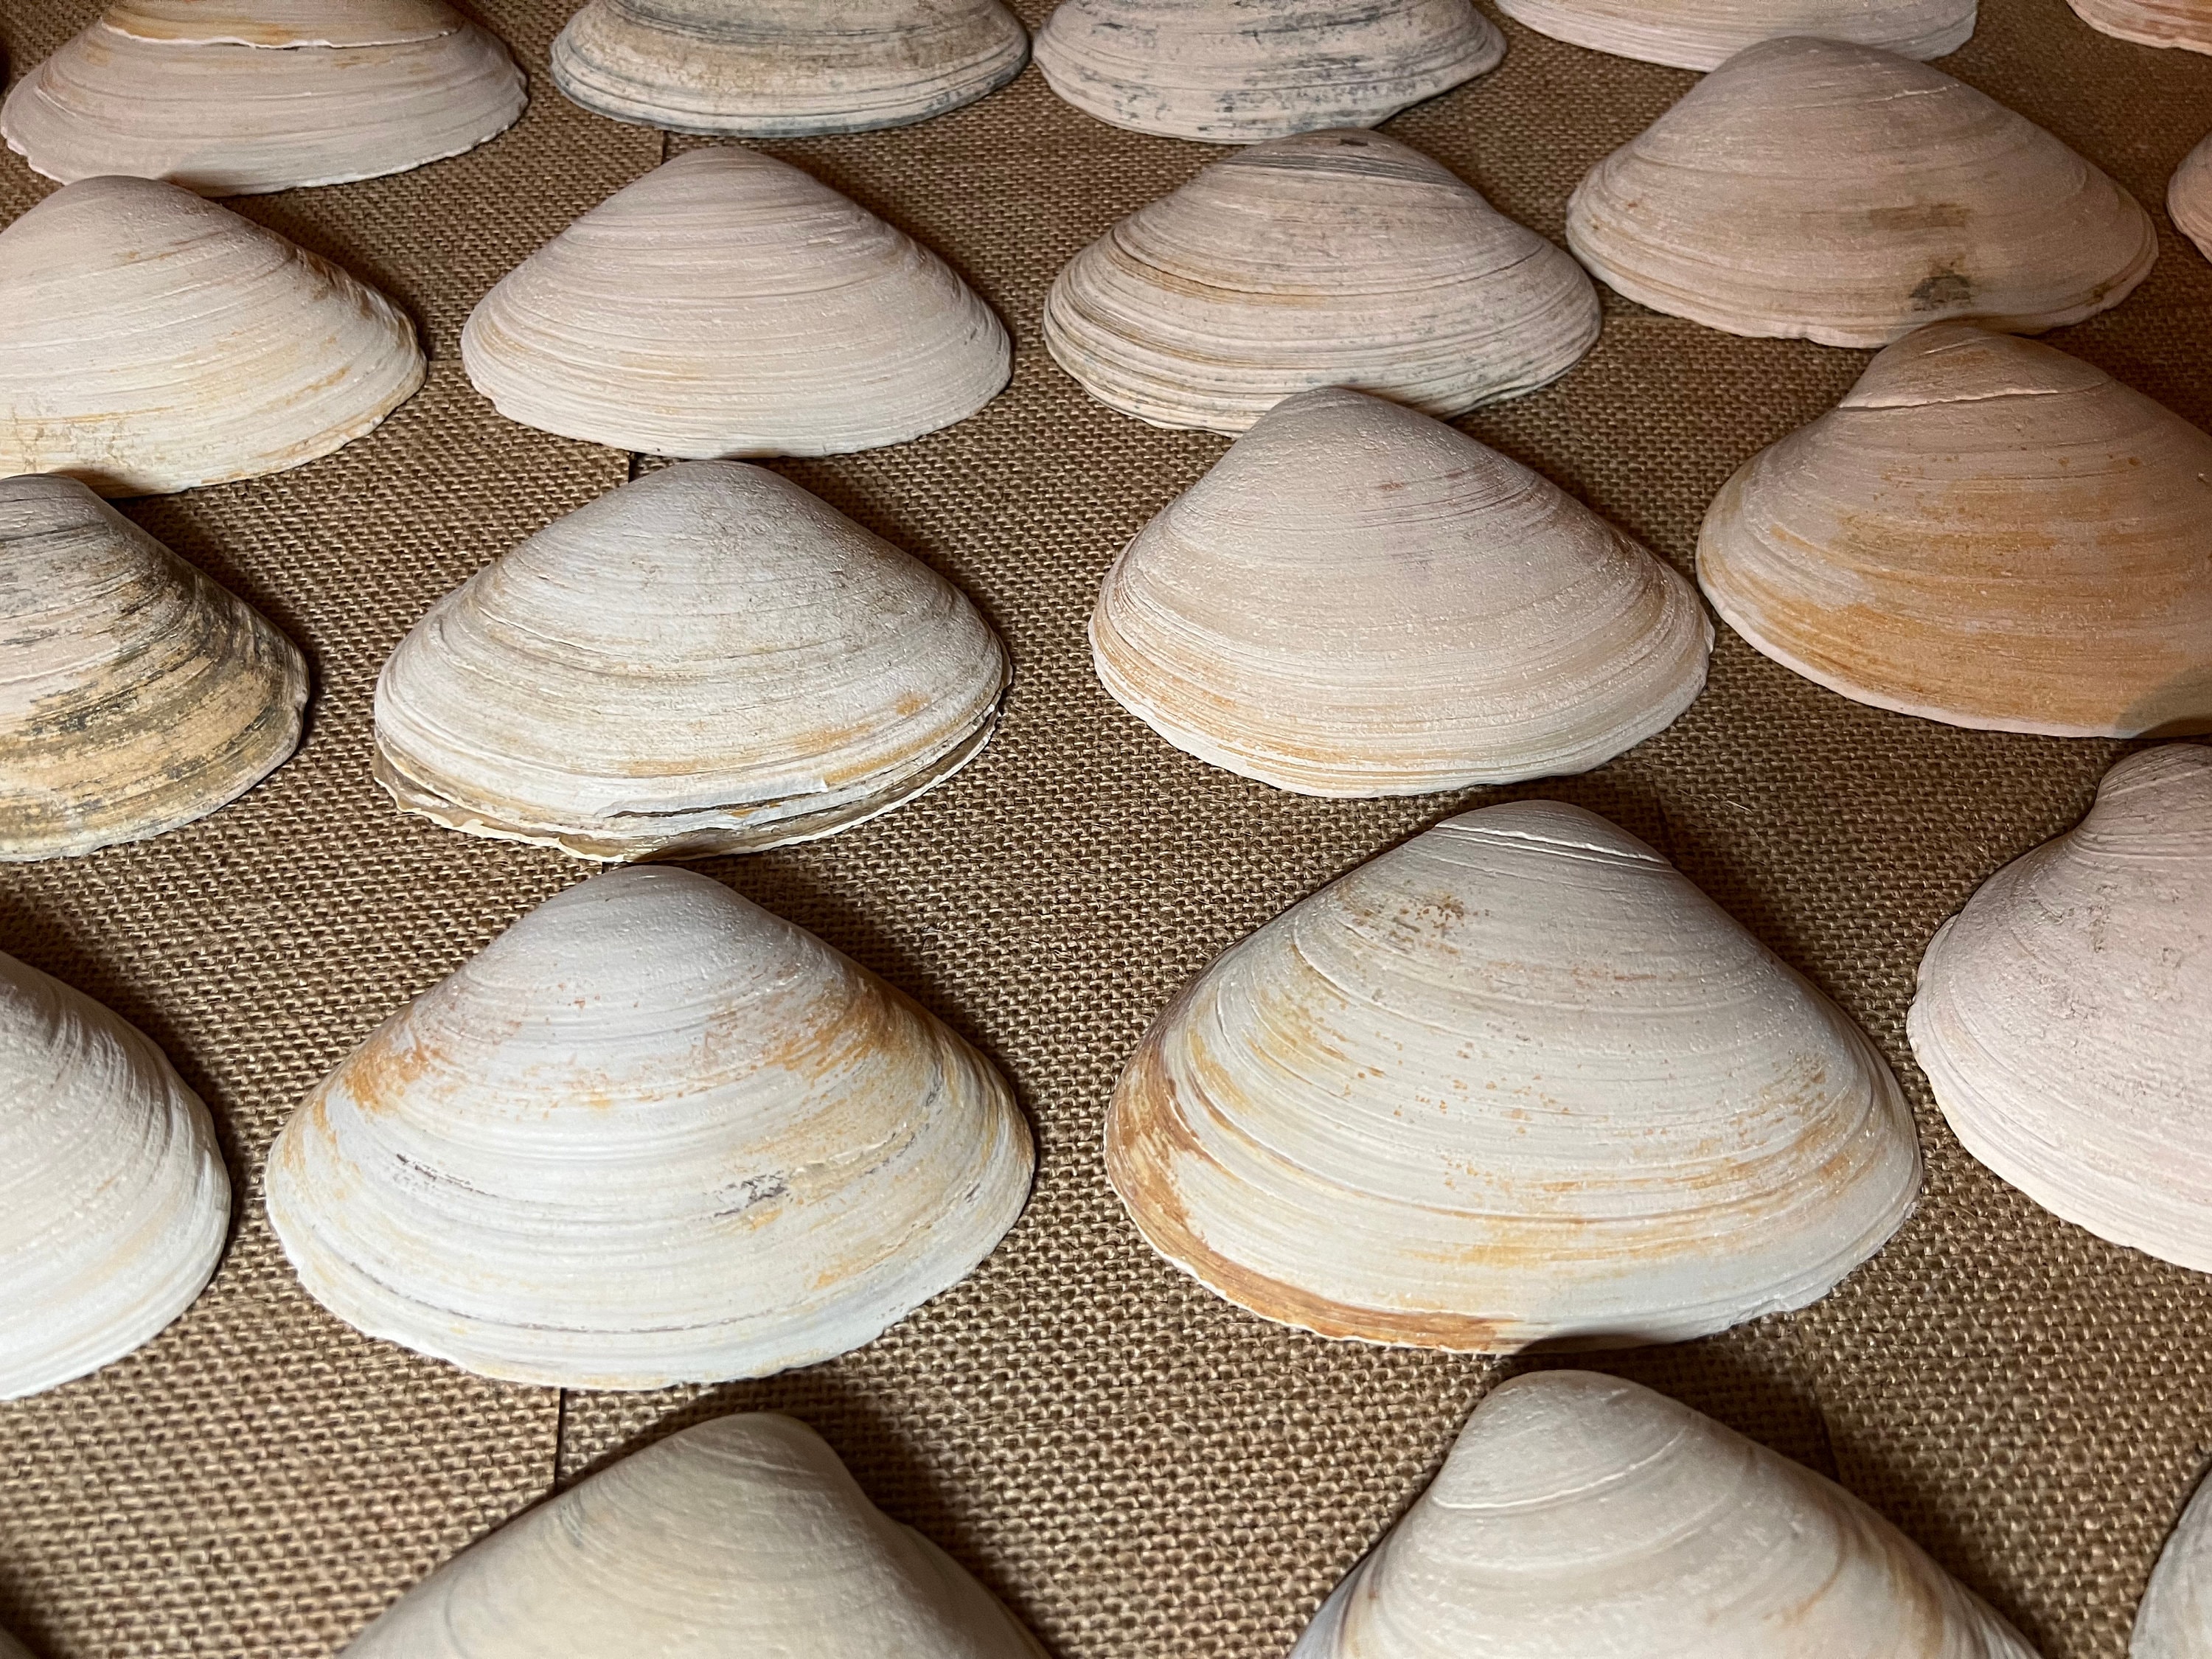 10 Large 3-4 Inch Clam Shells Long Island Decoupage Natural Seashells  Natural Shells Craft Seashells Seashells for Crafts 